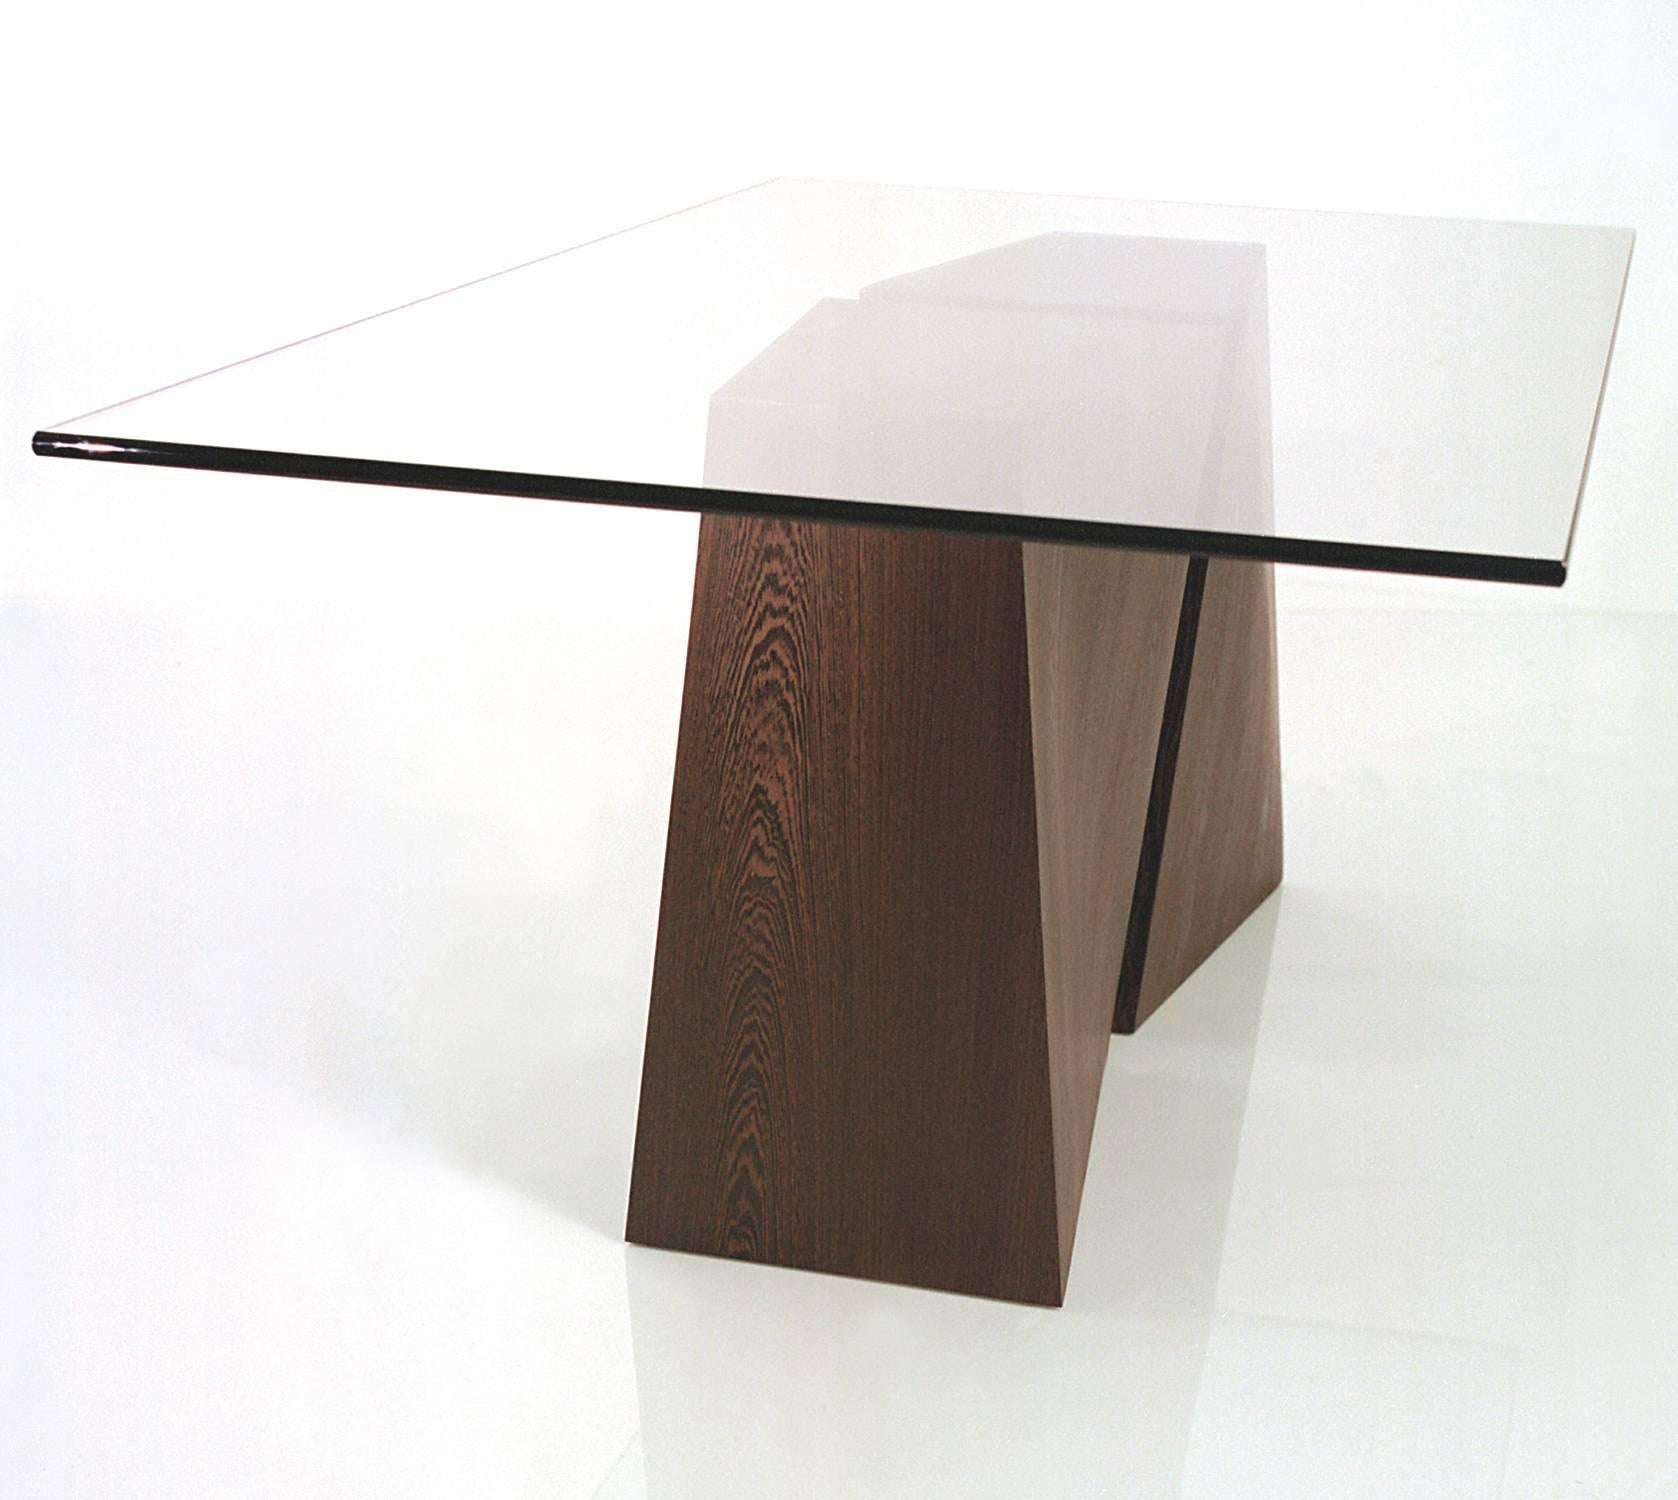 The aan is convex on both sides, the aix concave. The set is offered in custom dimensions and finishes. Some of the artist's preferred finishes are suggested.